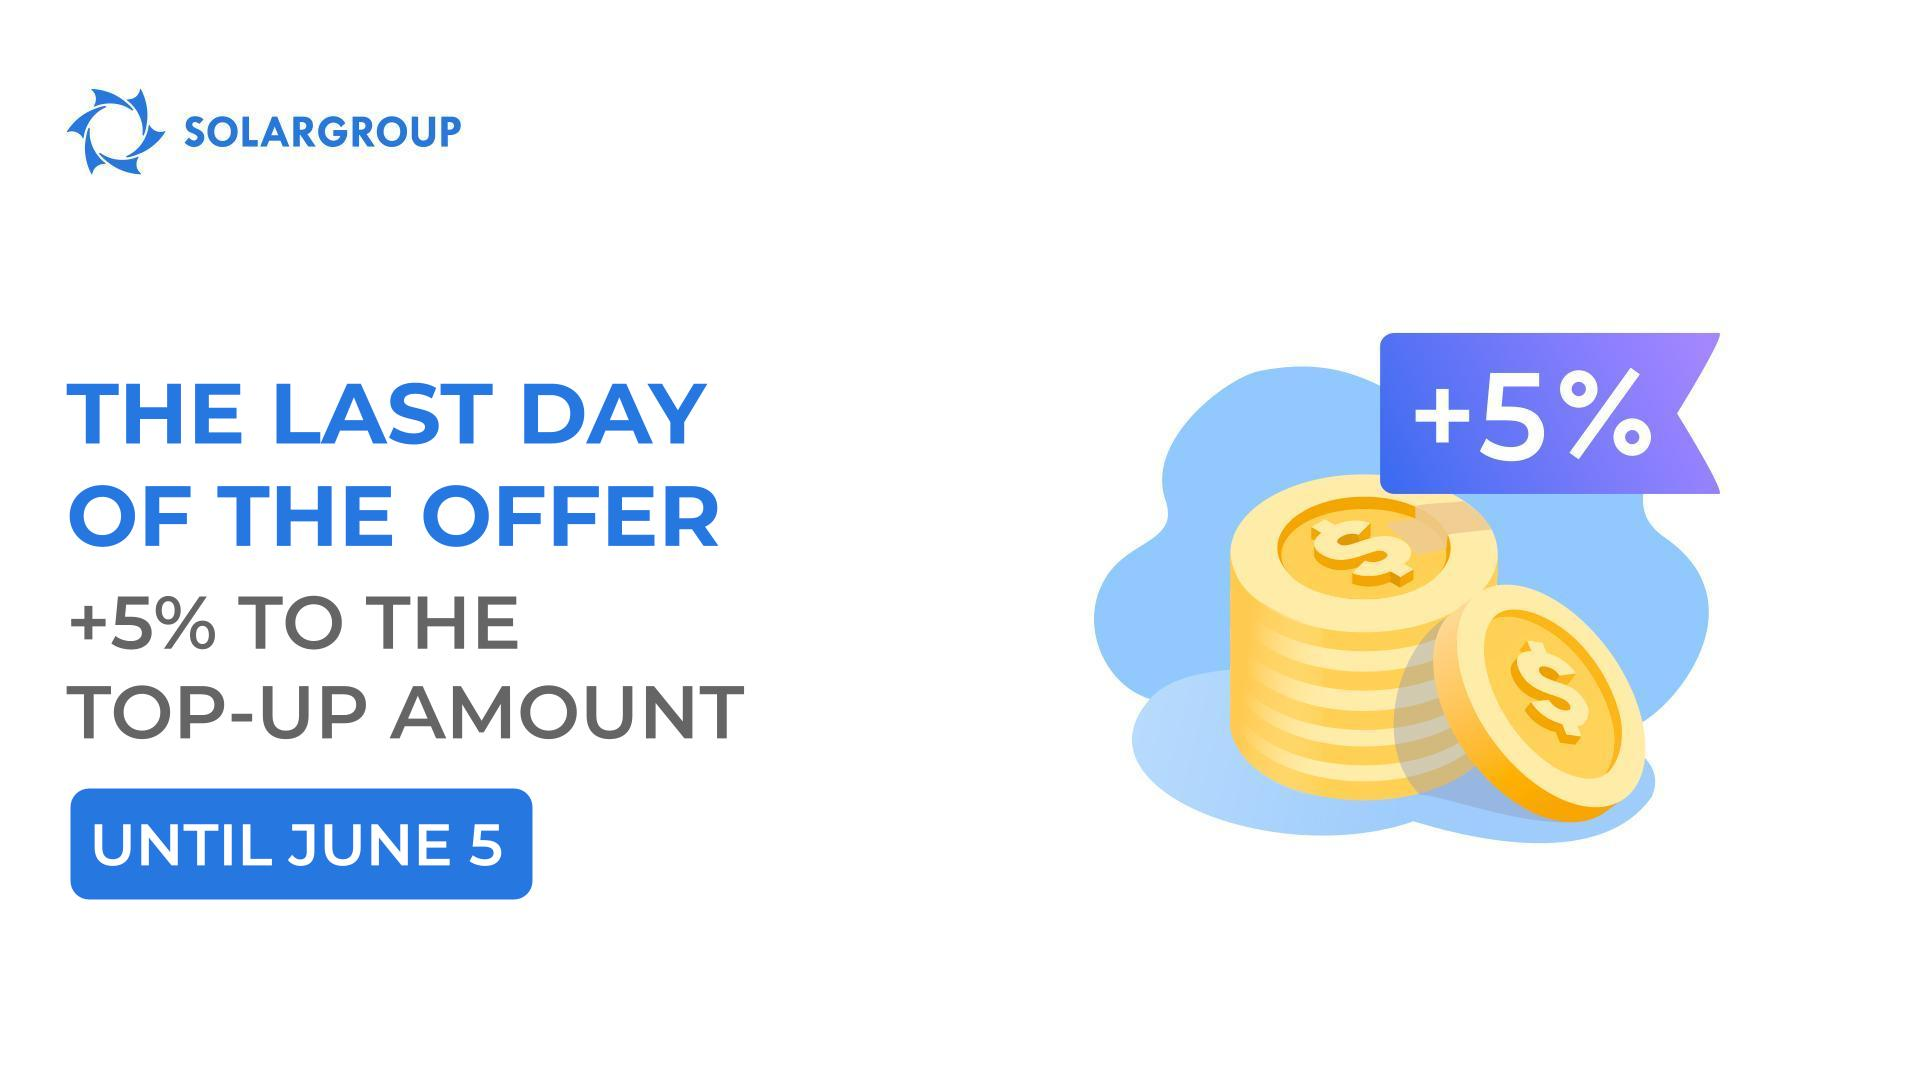 The "+5% to the top-up amount" offer is about to expire